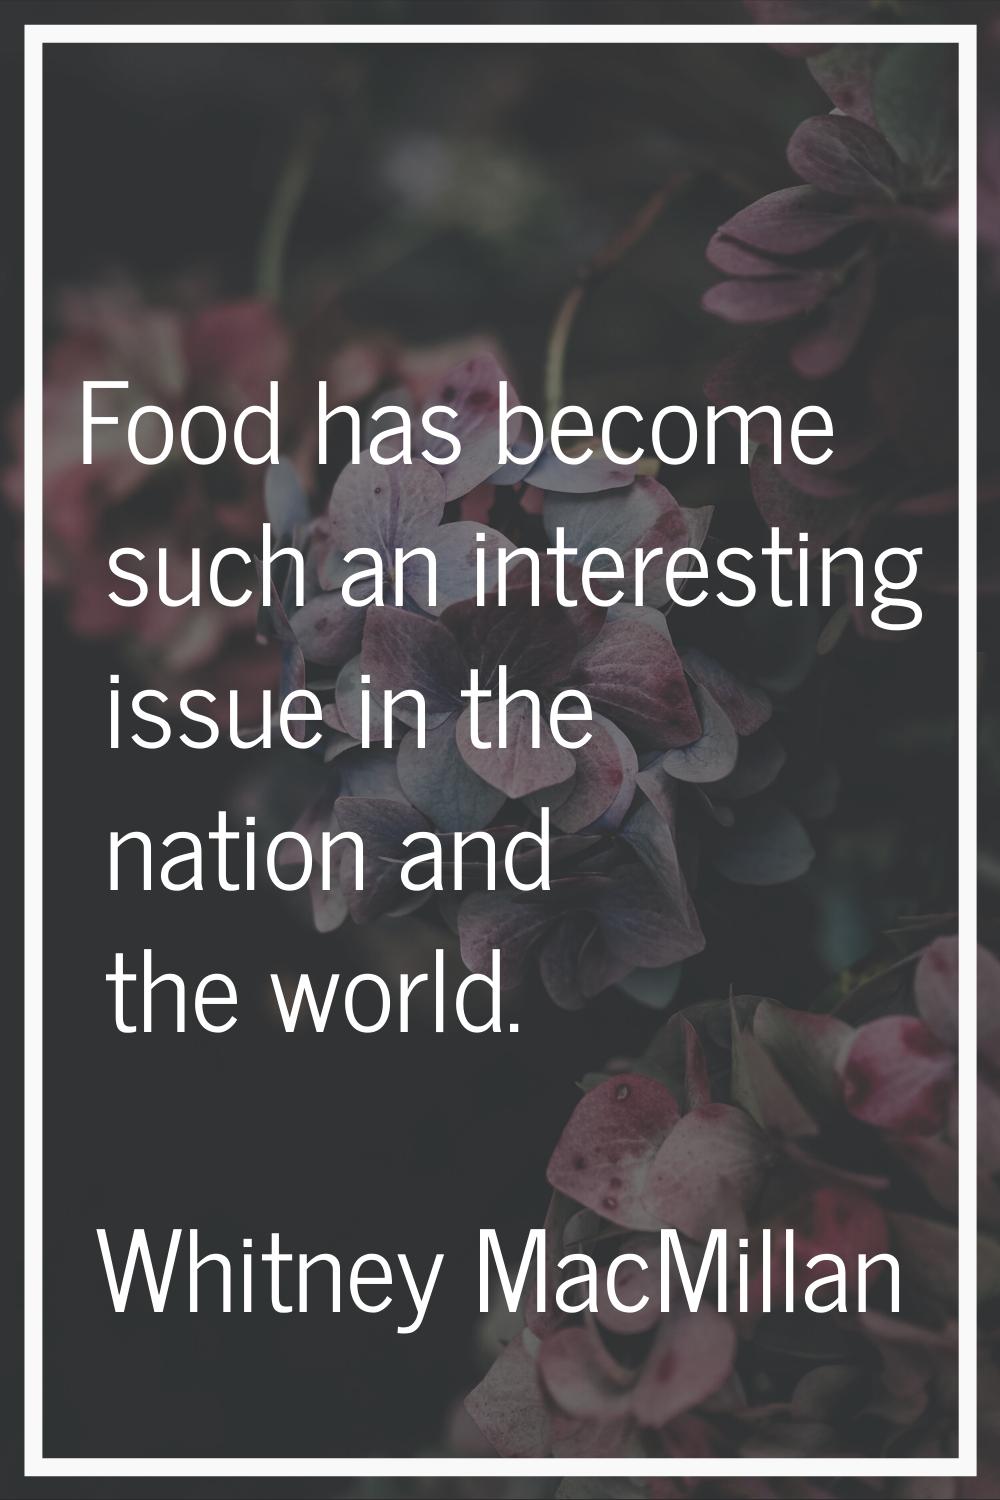 Food has become such an interesting issue in the nation and the world.